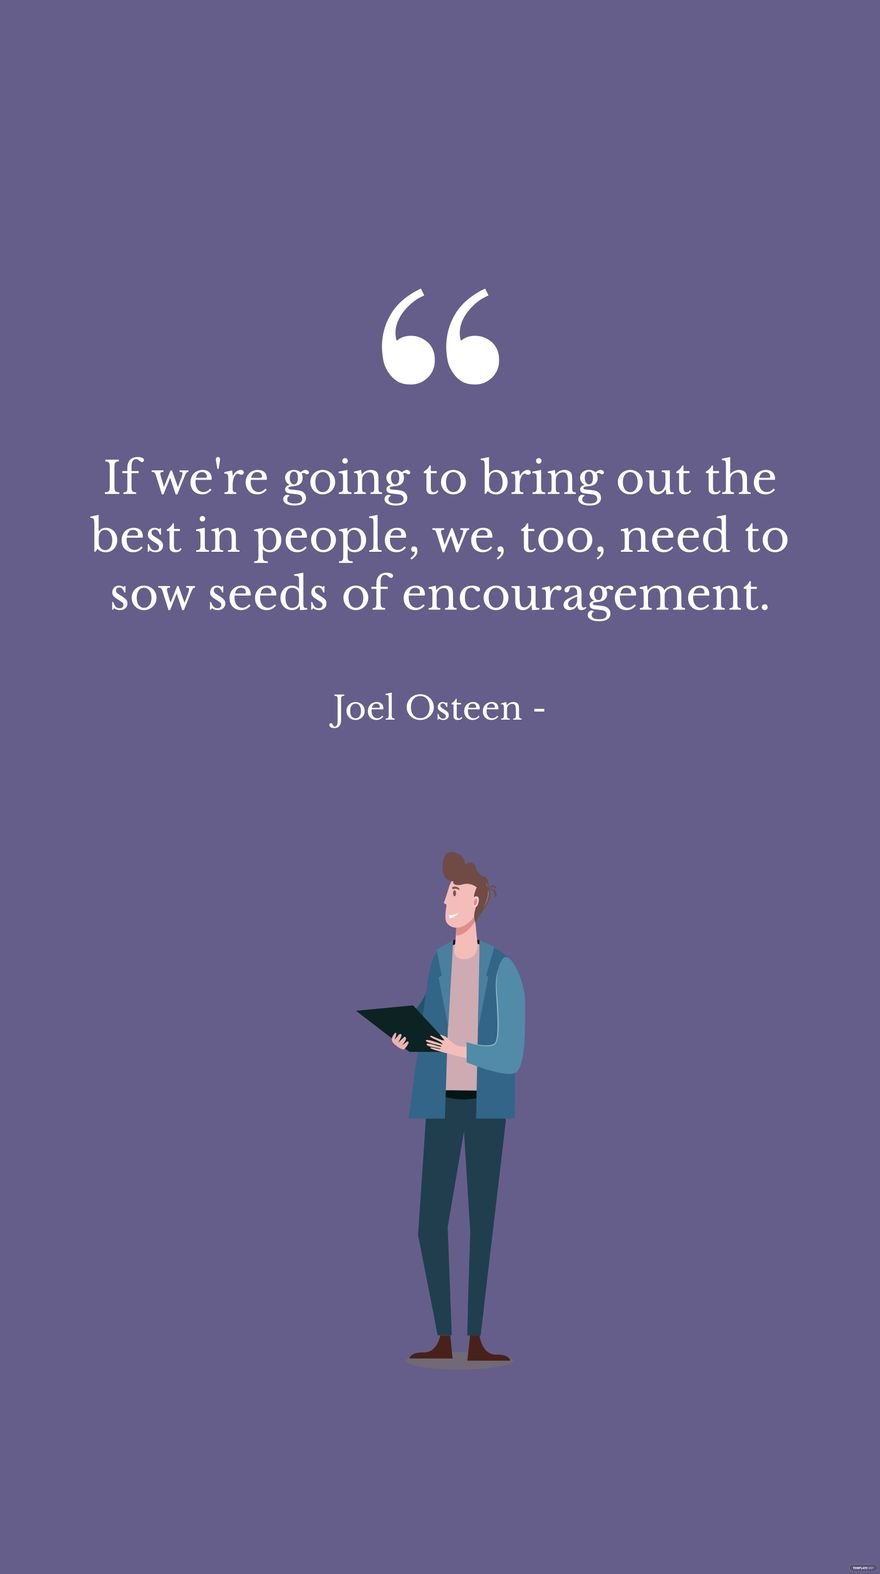 Joel Osteen - If we're going to bring out the best in people, we, too, need to sow seeds of encouragement.